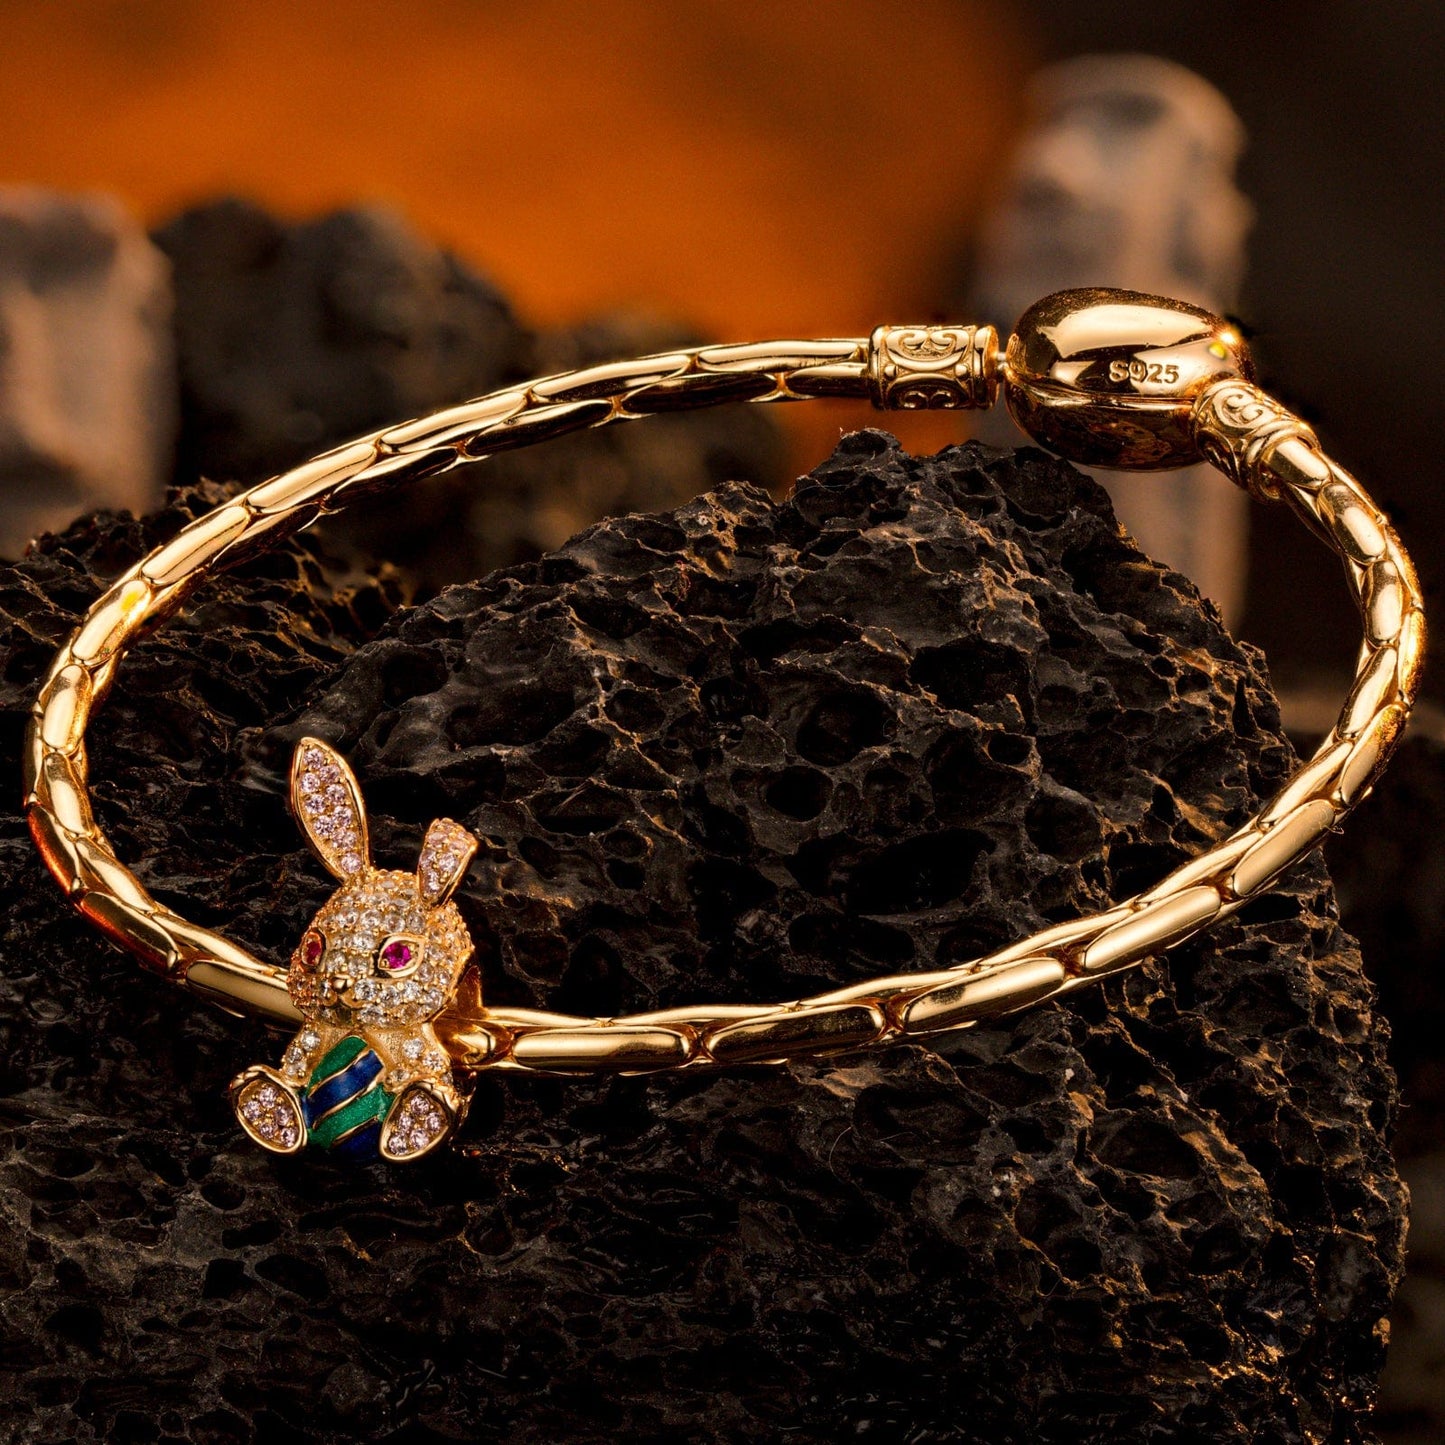 Shinning Easter Bunny Tarnish-resistant Silver Charms With Enamel In 14K Gold Plated